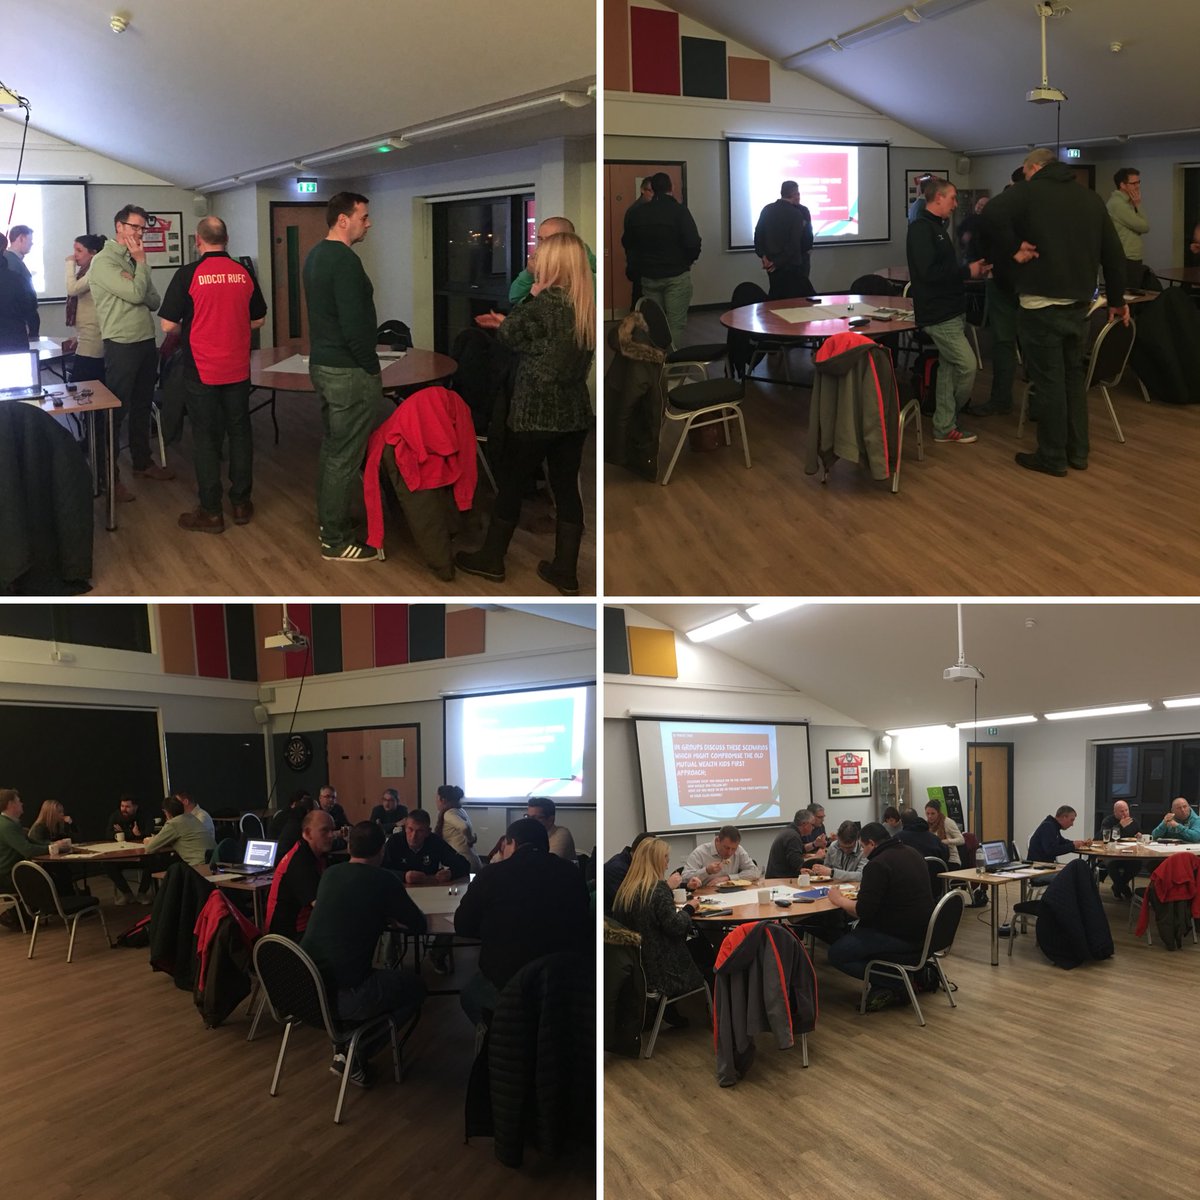 Fantastic evening supporting the Old Mutual Wealth Kids First Communities event @DidcotRUFC. 20 volunteers from the hosts, @AbingdonRUFC, @GABRFCYouth, @Littlemorerfc and @wallingfordrfc sharing knowledge and experiences